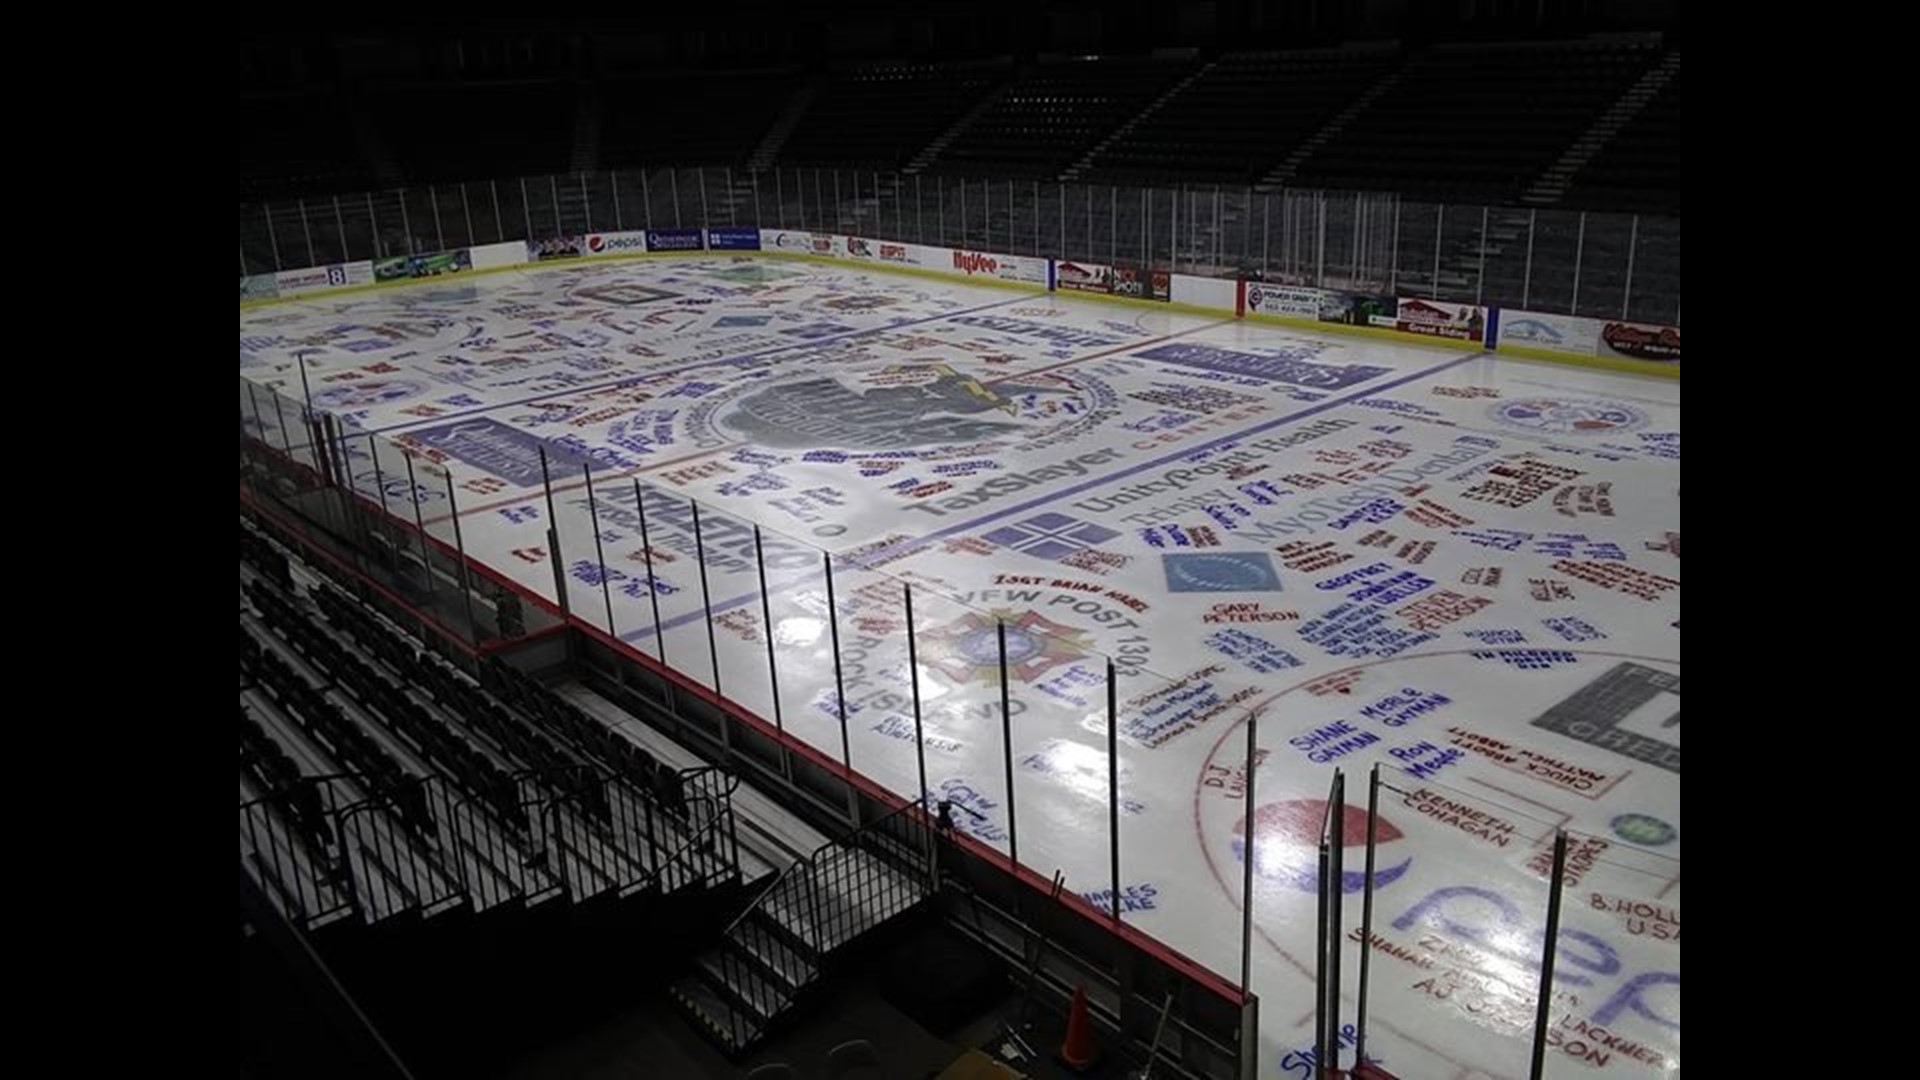 The public can go to the Vibrant Arena at The Mark and write names of military heroes on the ice. They will be shown off during their Salute to Military game on Fri.